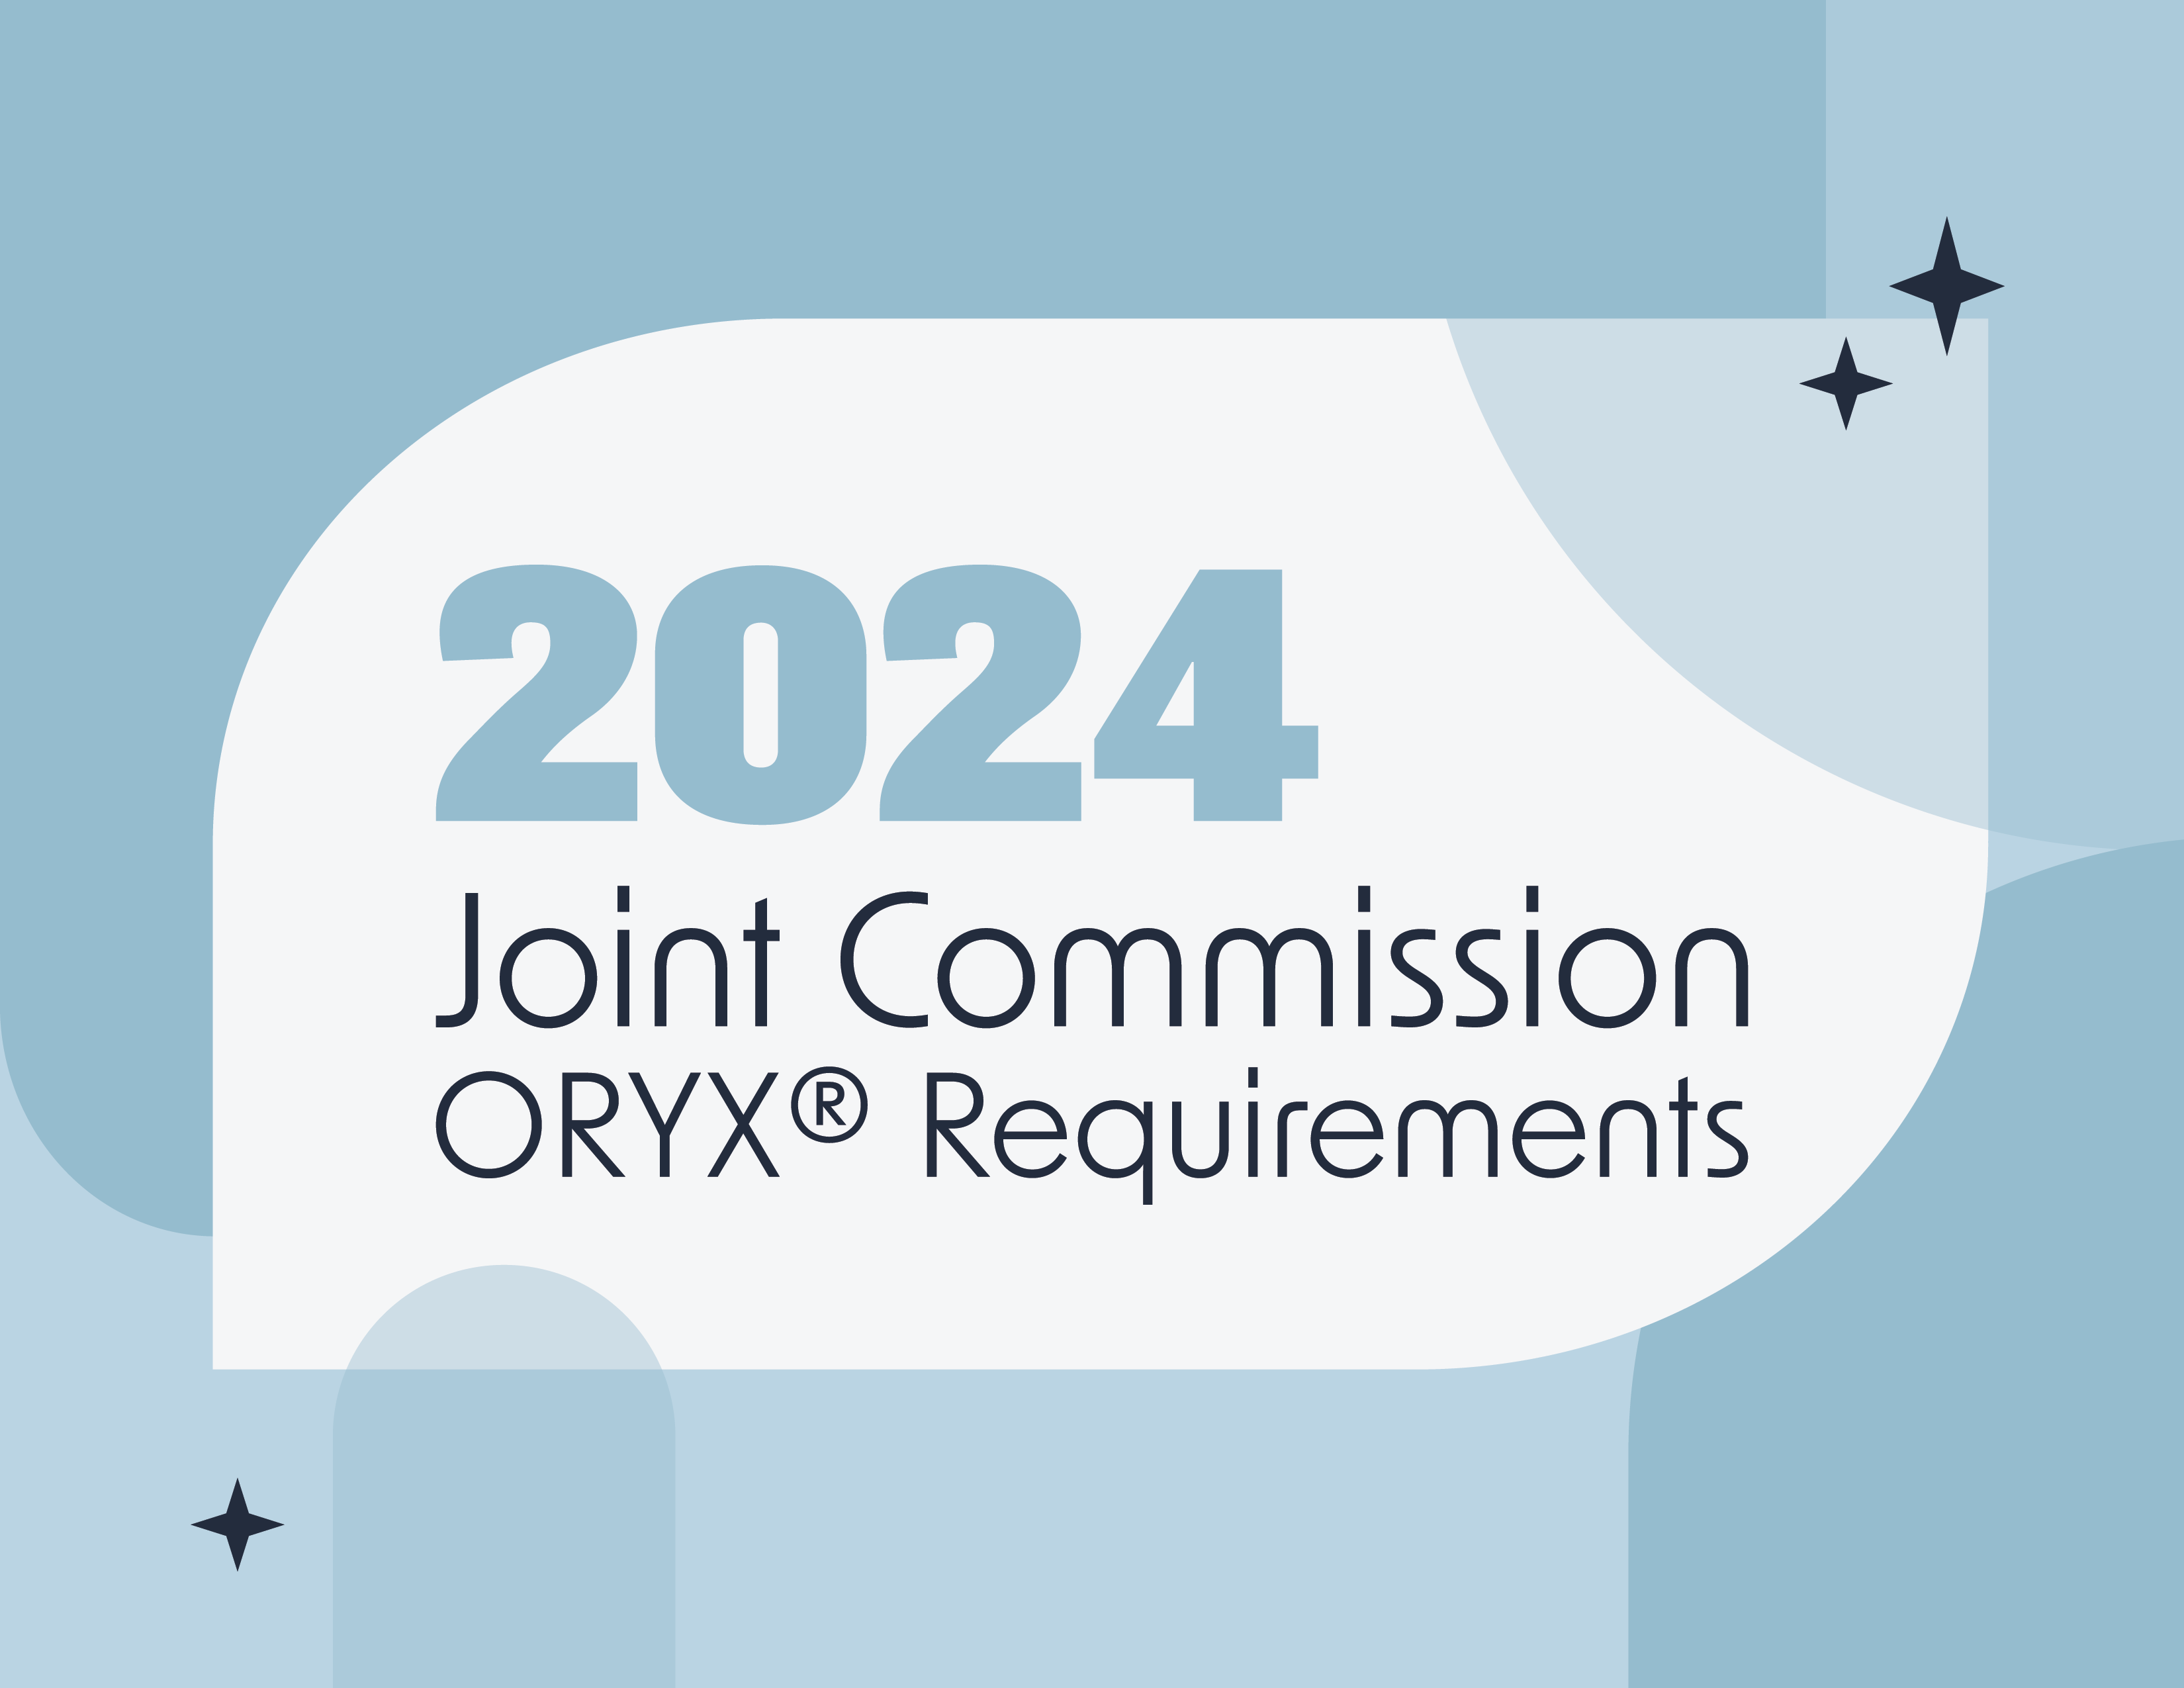 2024 Joint Commission ORYX Requirements